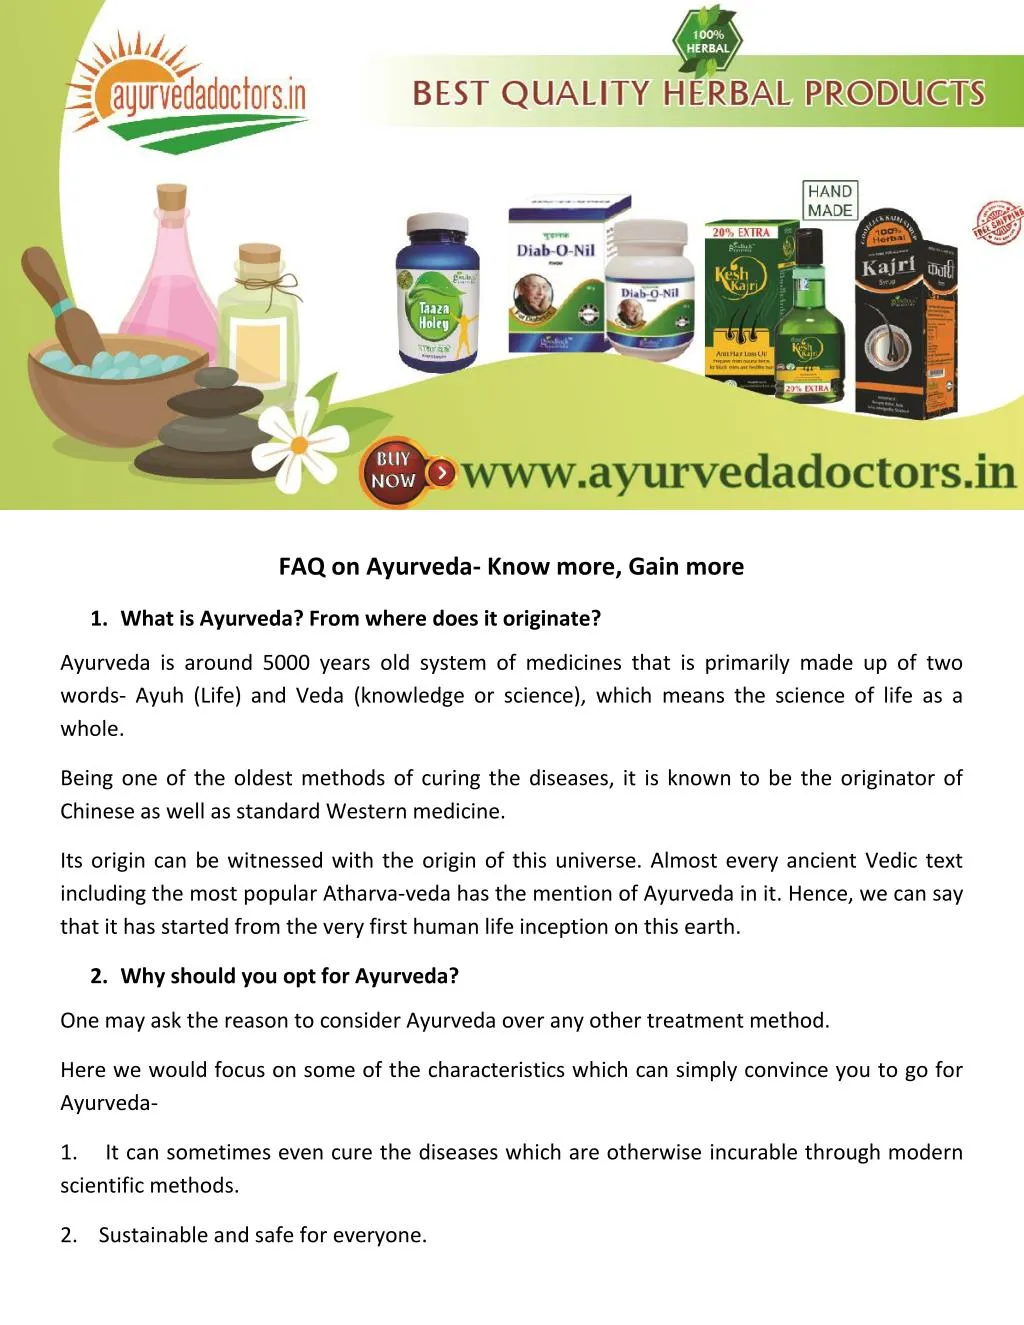 faq on ayurveda know more gain more